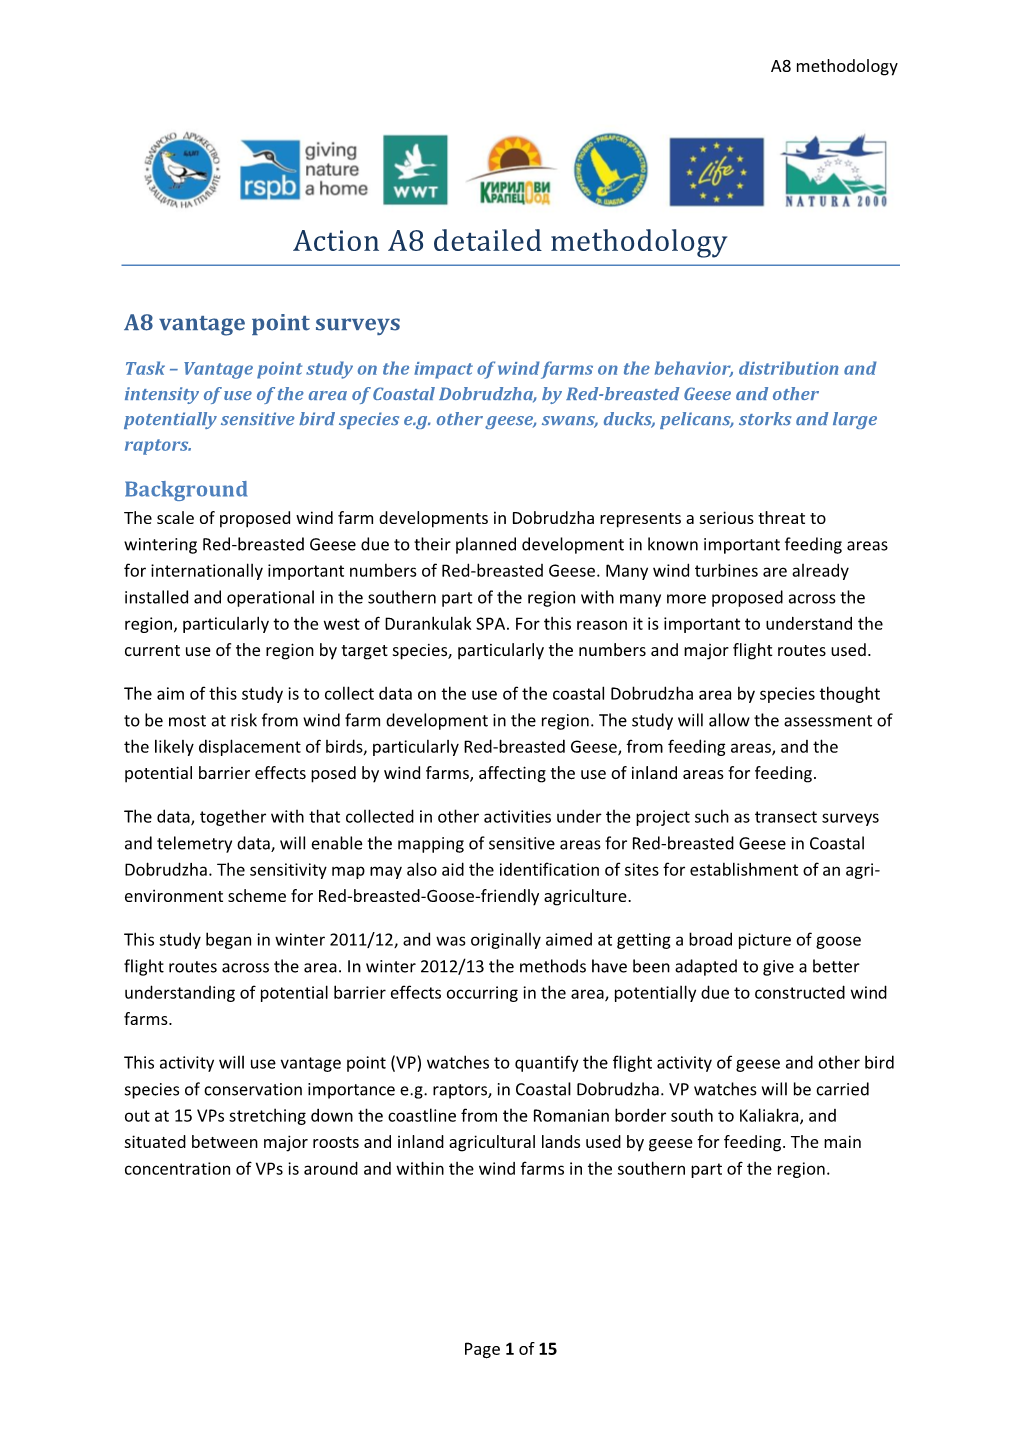 Action A8 Detailed Methodology